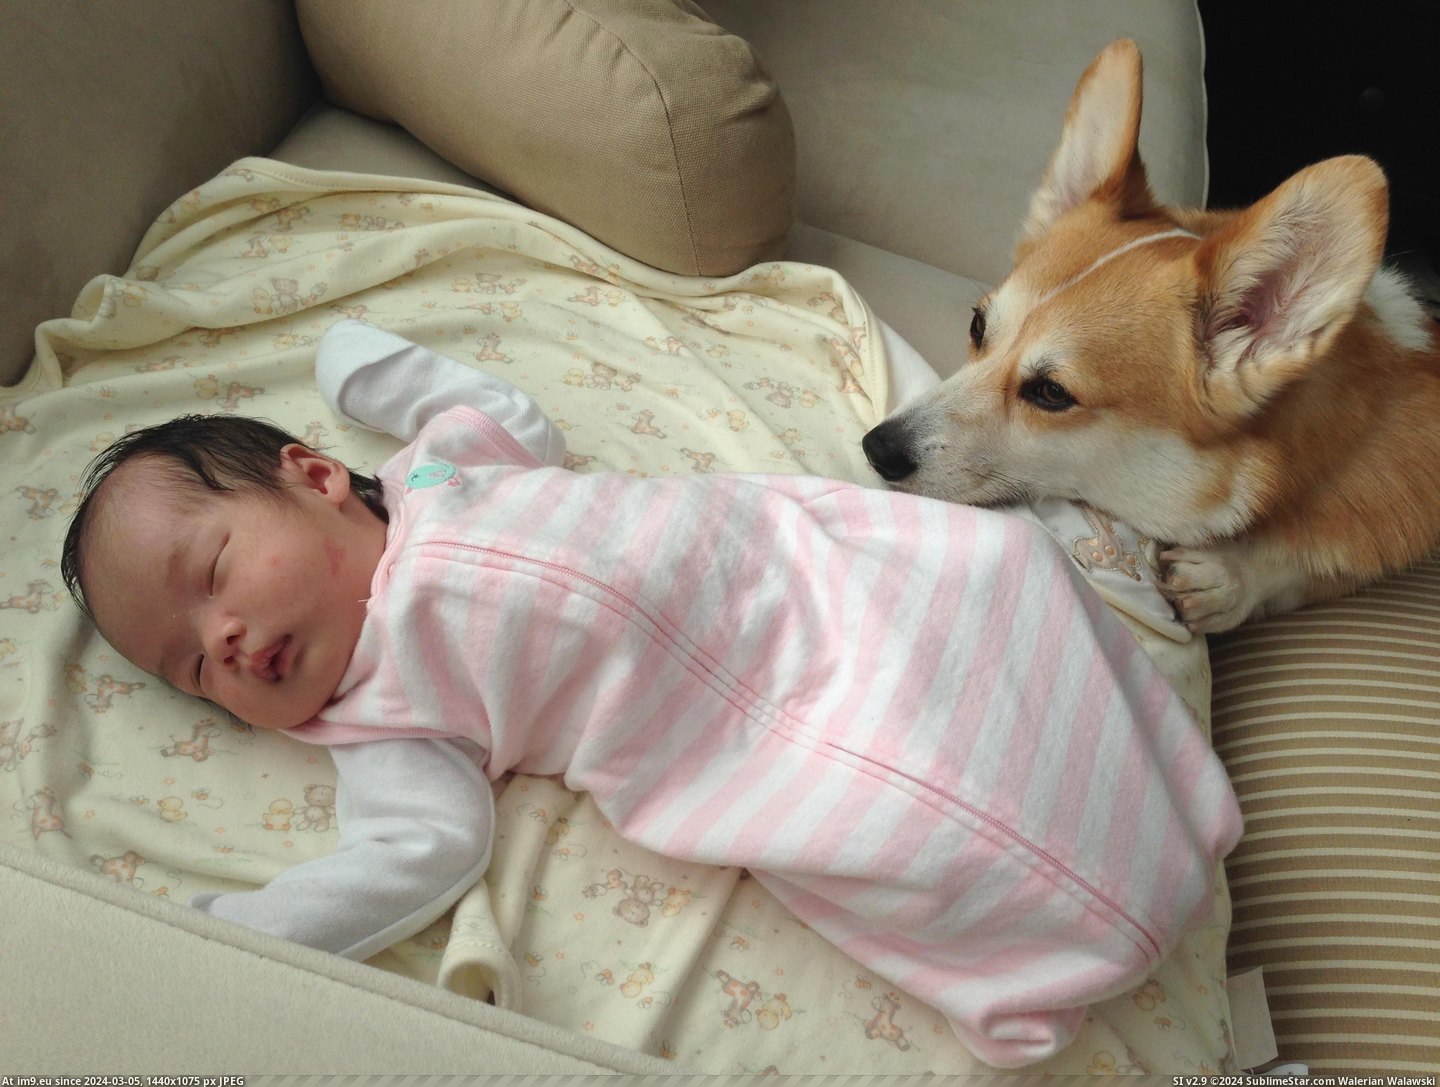 #Was #New #Ago #But #How #Daughter #Weeks #Born [Aww] My daughter was born three weeks ago. I worried about how my corgi would react but he's treating her like his new BFF... 3 Pic. (Obraz z album My r/AWW favs))